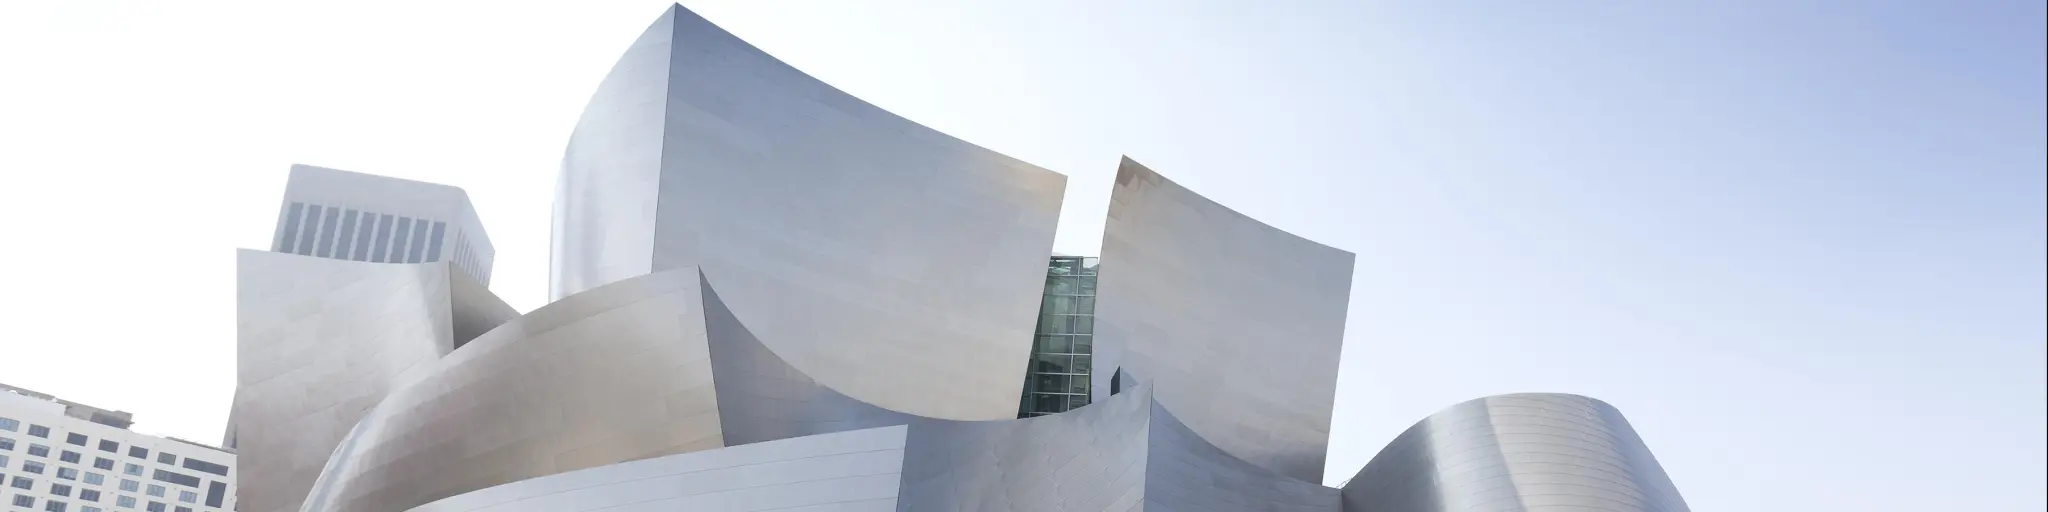 Walt Disney Concert Hall is designed by Frank Gehry and is the home of the Los Angeles Philharmonic orchestra. Photo taken on a bright day.